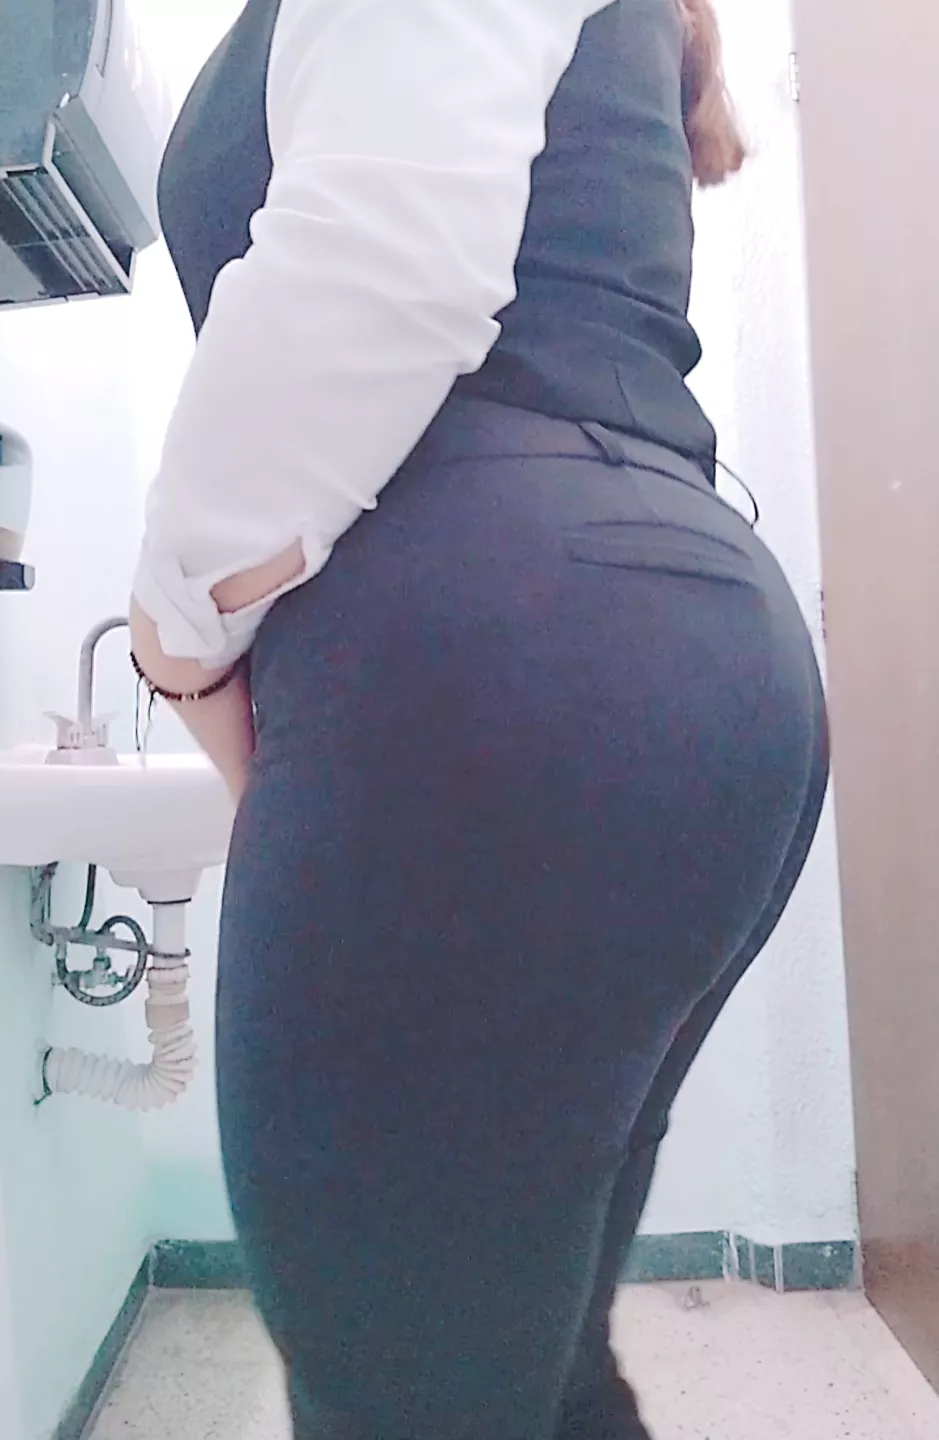 Sexy Mexican MILF secretary with a big butt takes off her uniform at the office and shows her nice and sensual